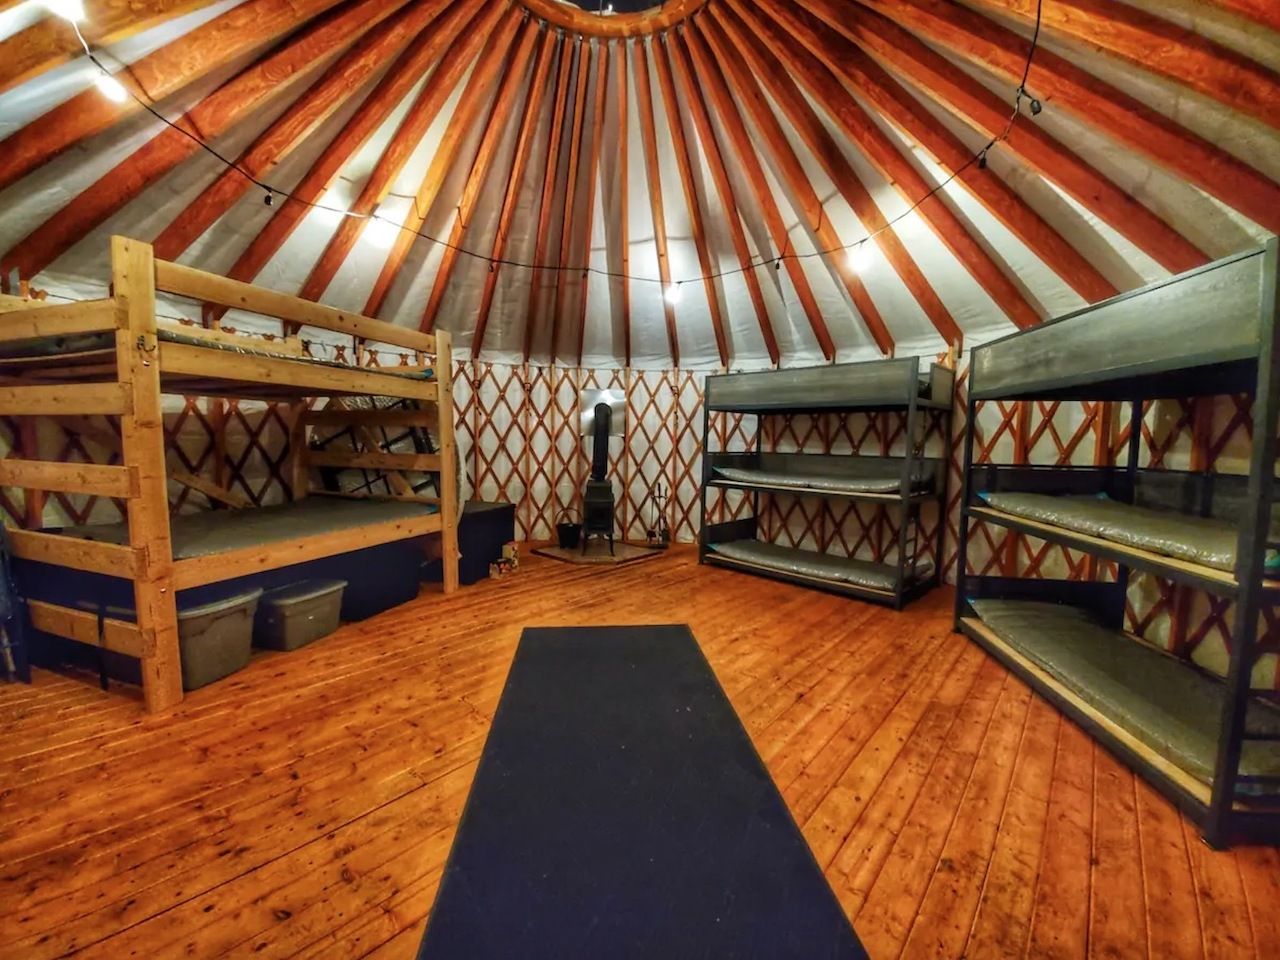 A yurt interior with three bunk beds